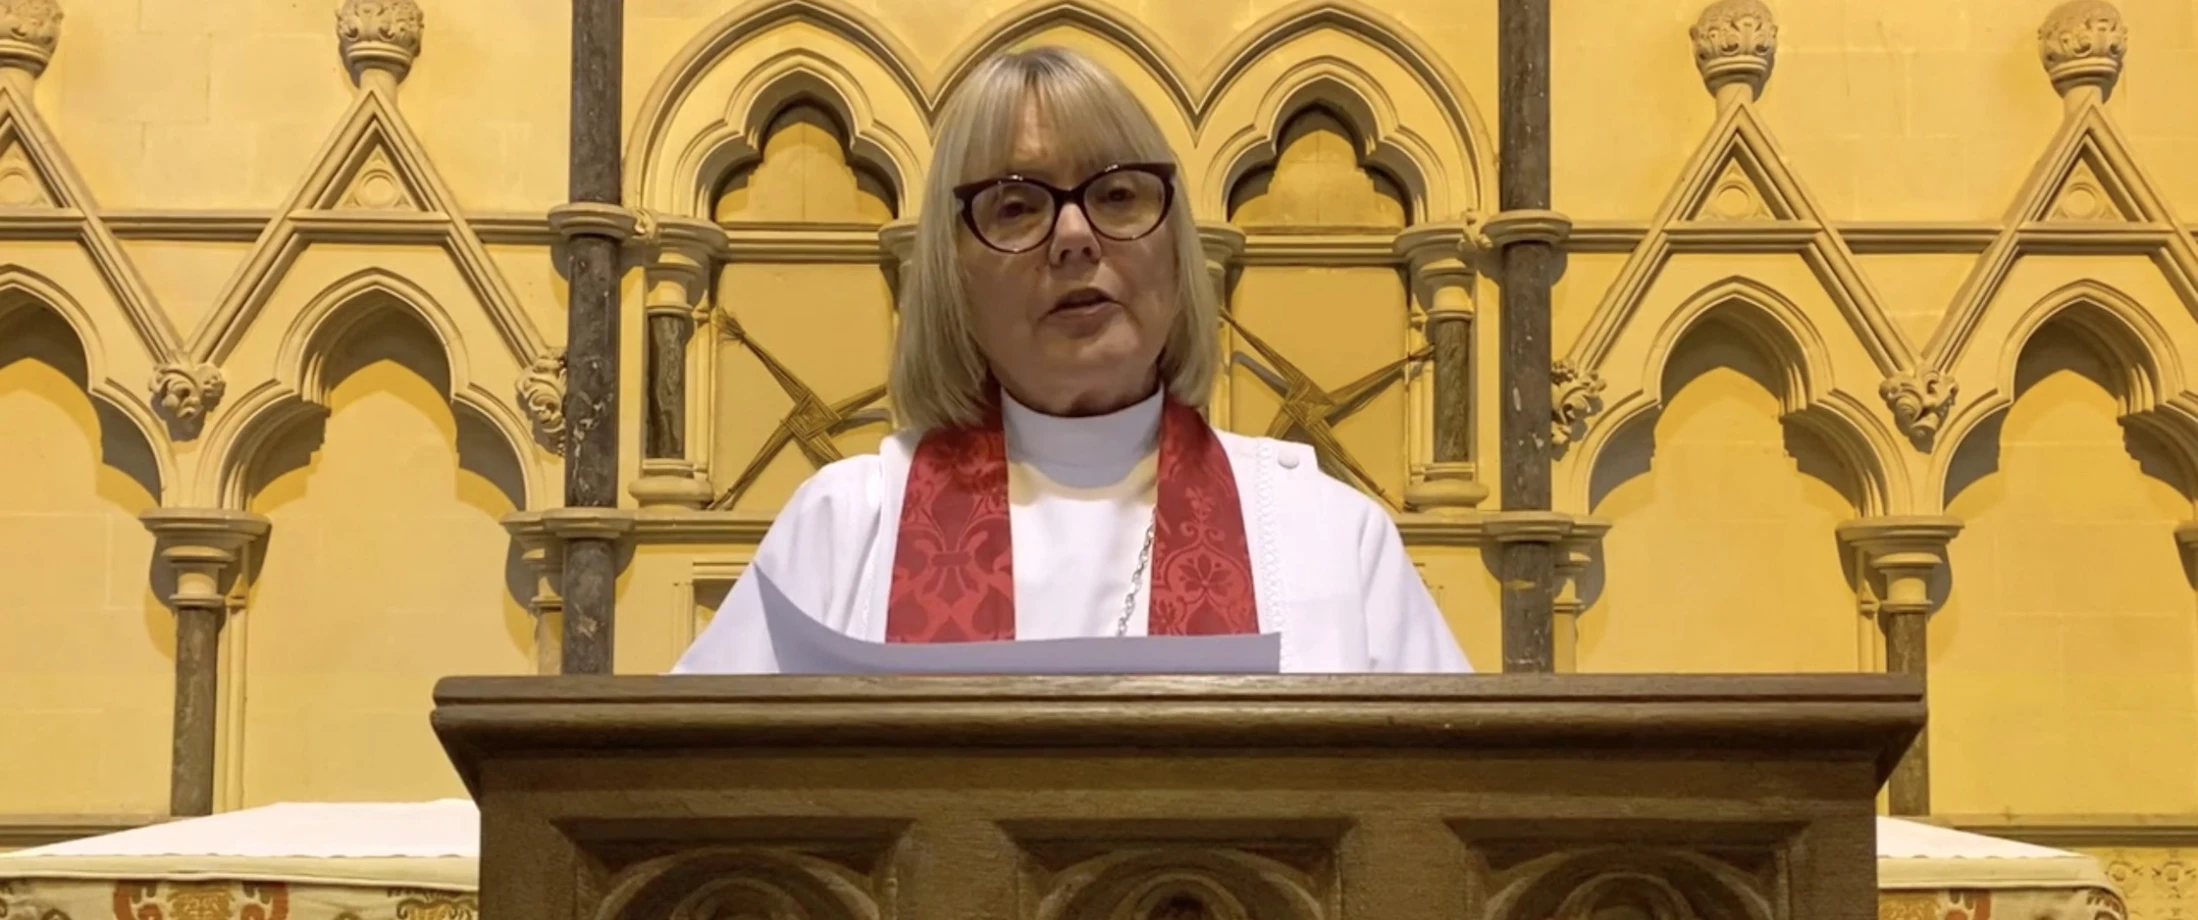 Finding hope – Synod Service Sermon by Bishop Pat Storey